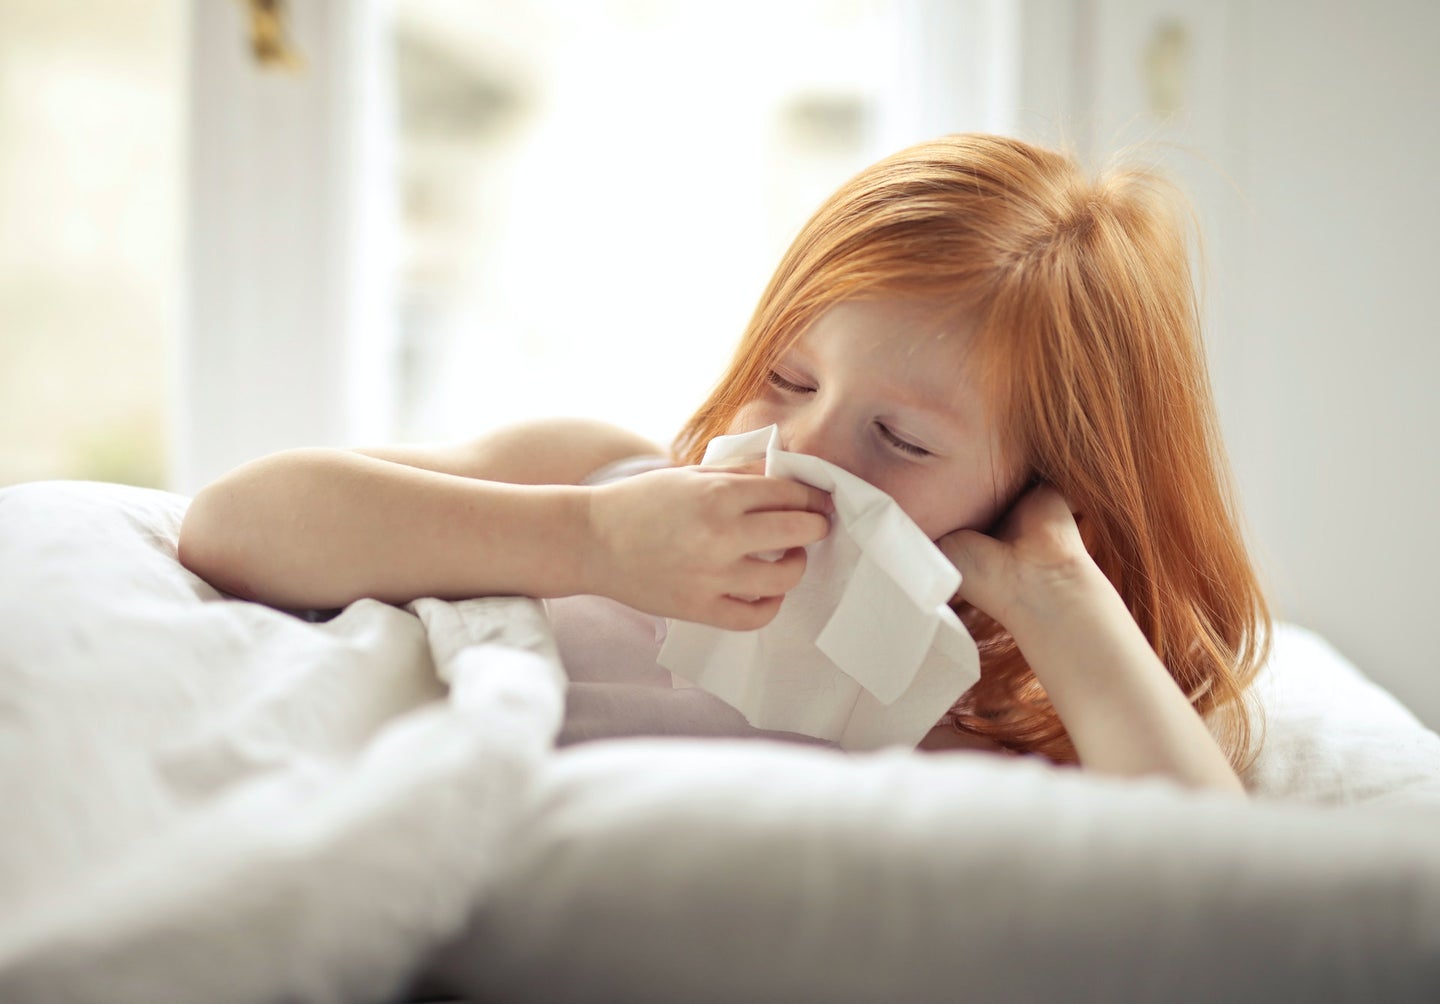 A young girl in bed wipes her nose.